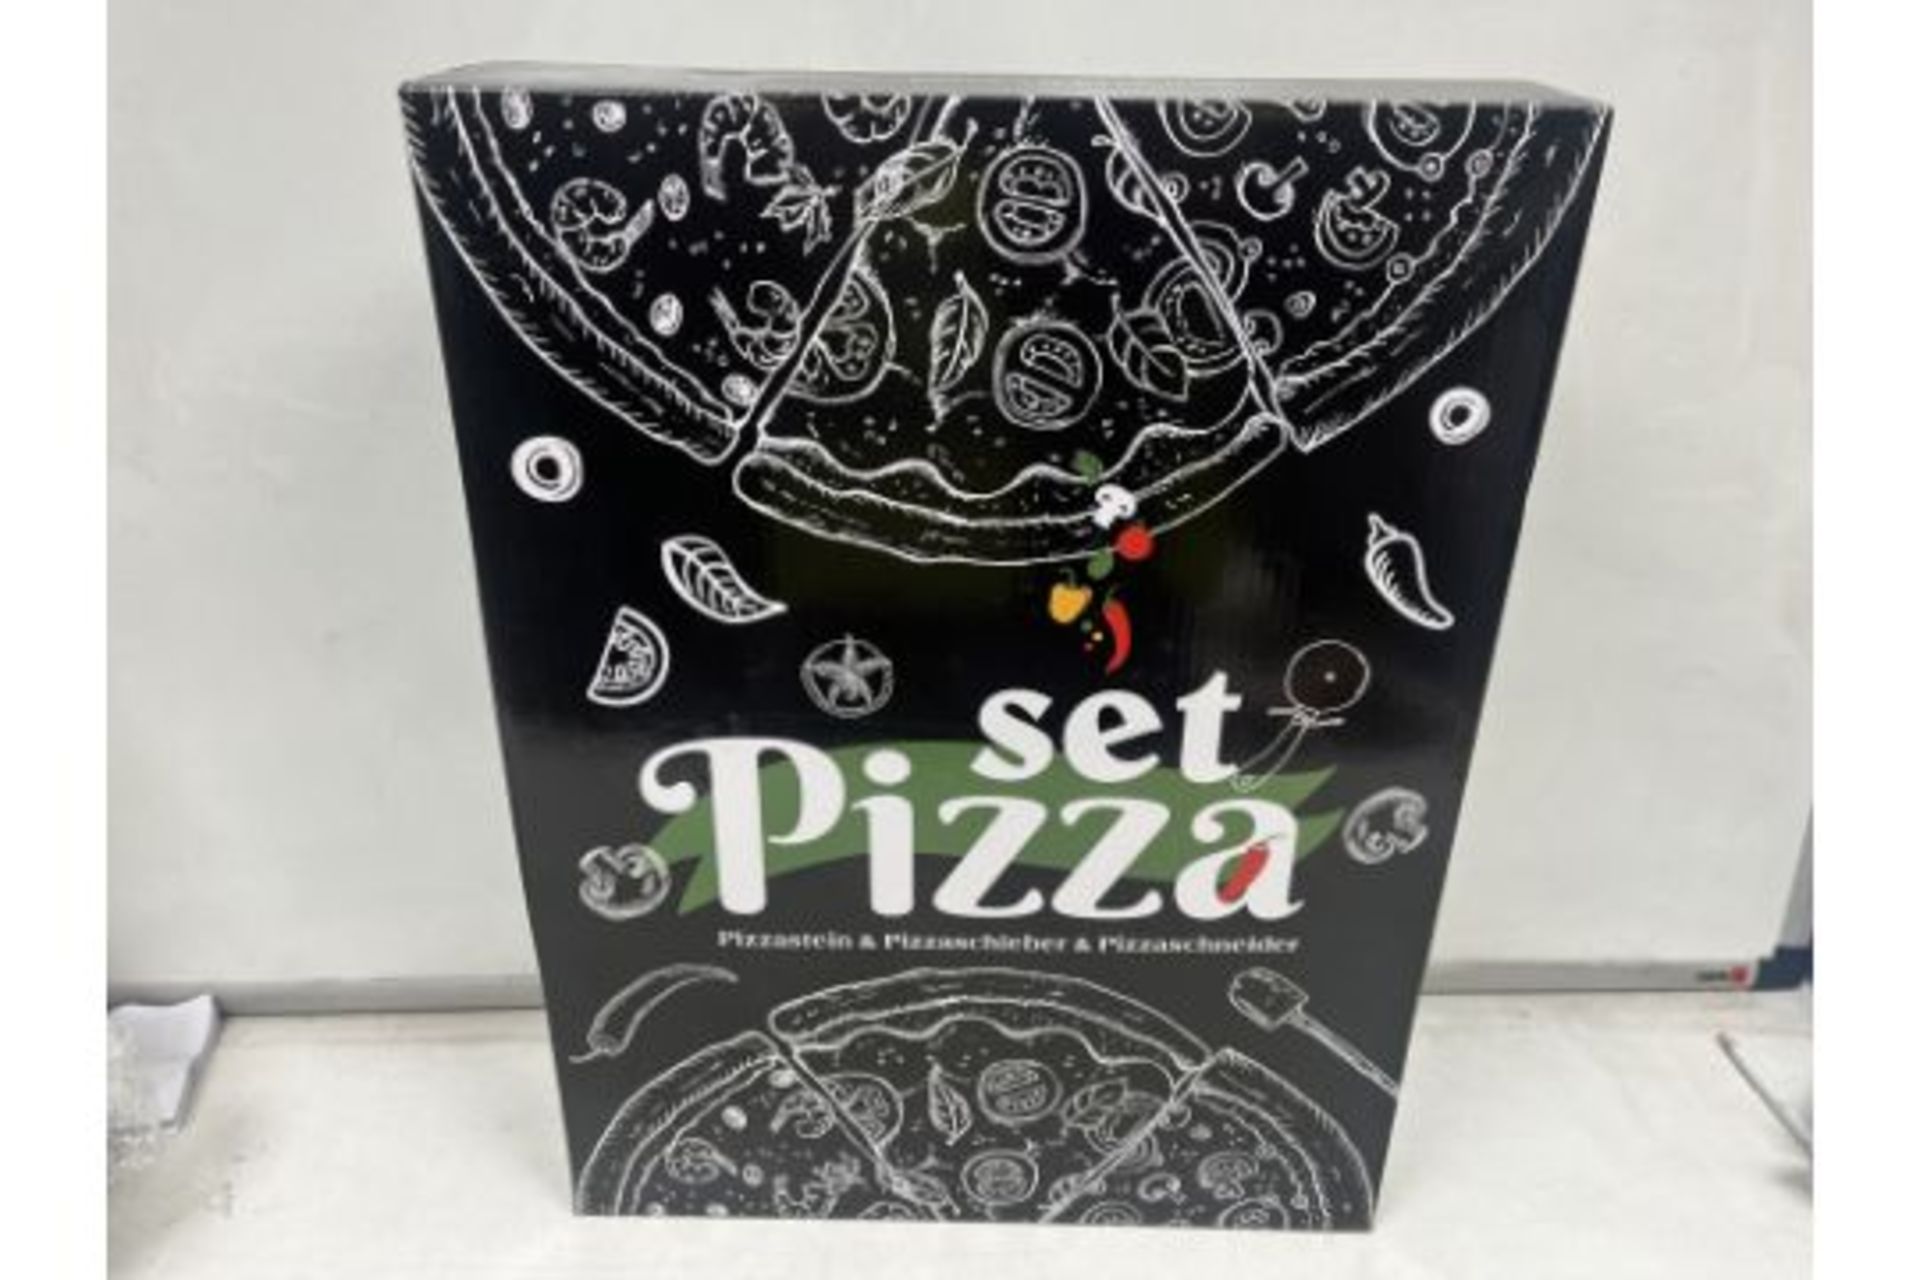 4 X BRAND NEW LARGE PIZZA STONE SETS RRP £40 EACH S1P